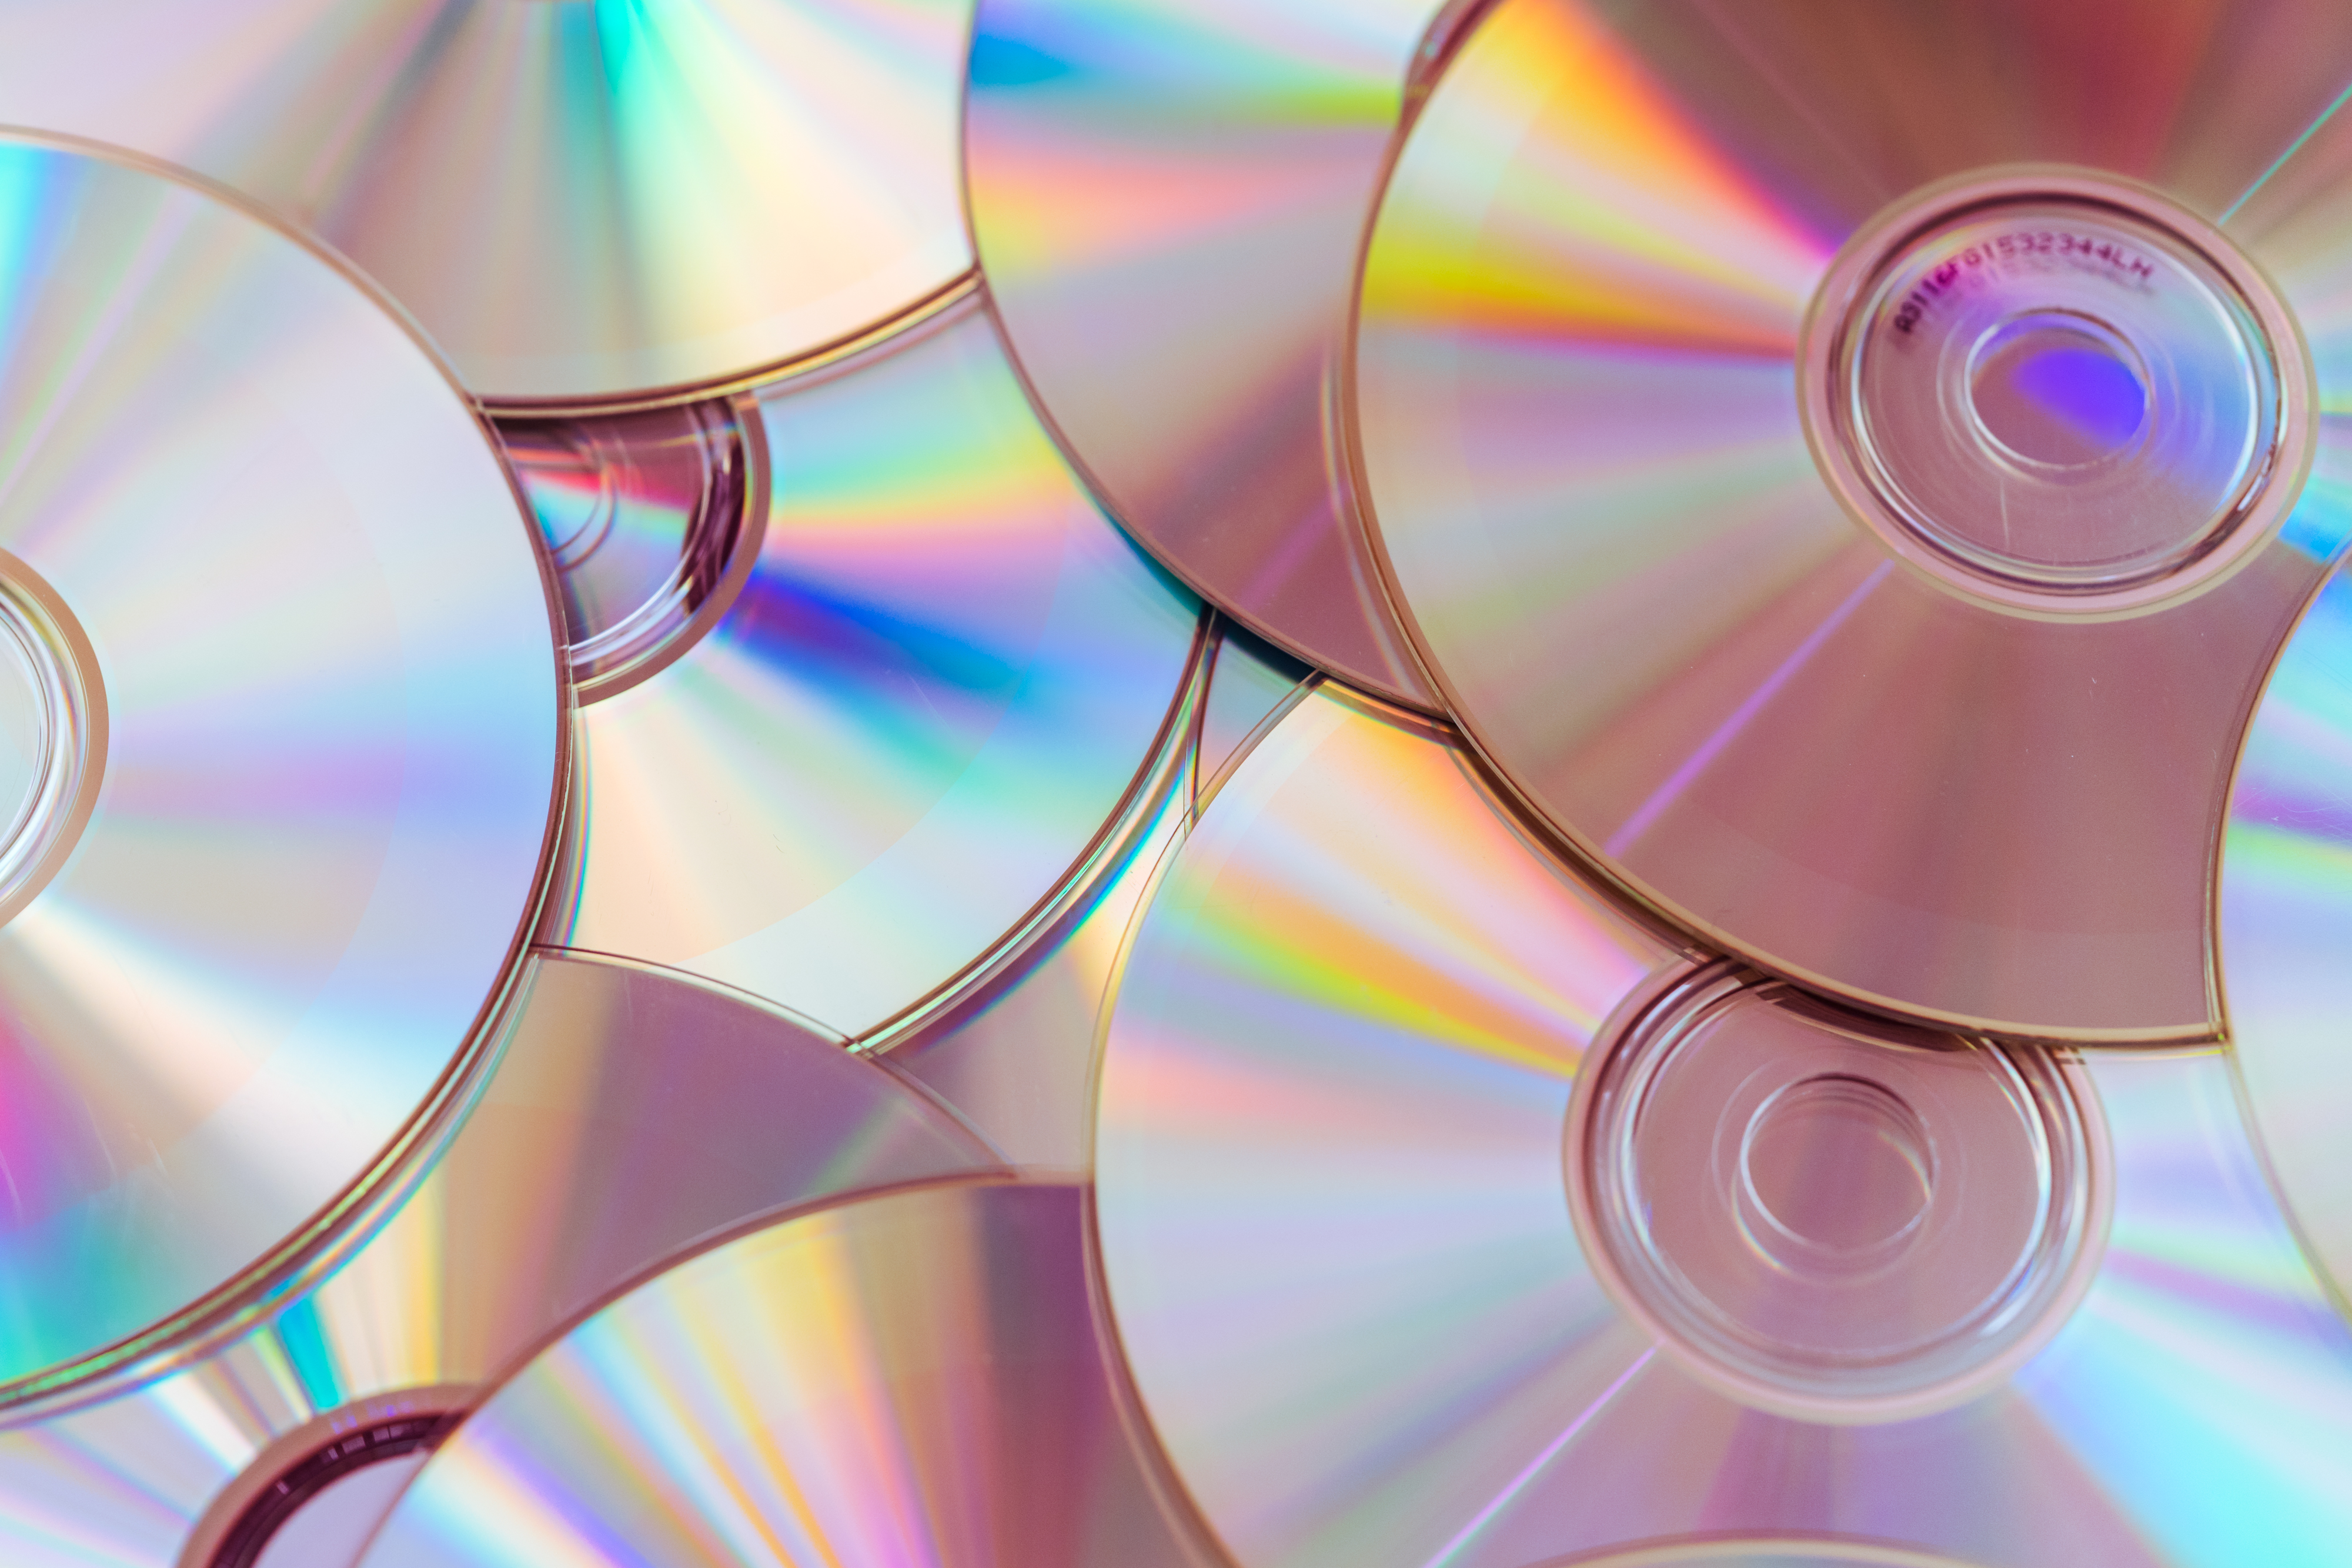 pile-of-cds-compact-discs-and-dvds-picjumbo-com